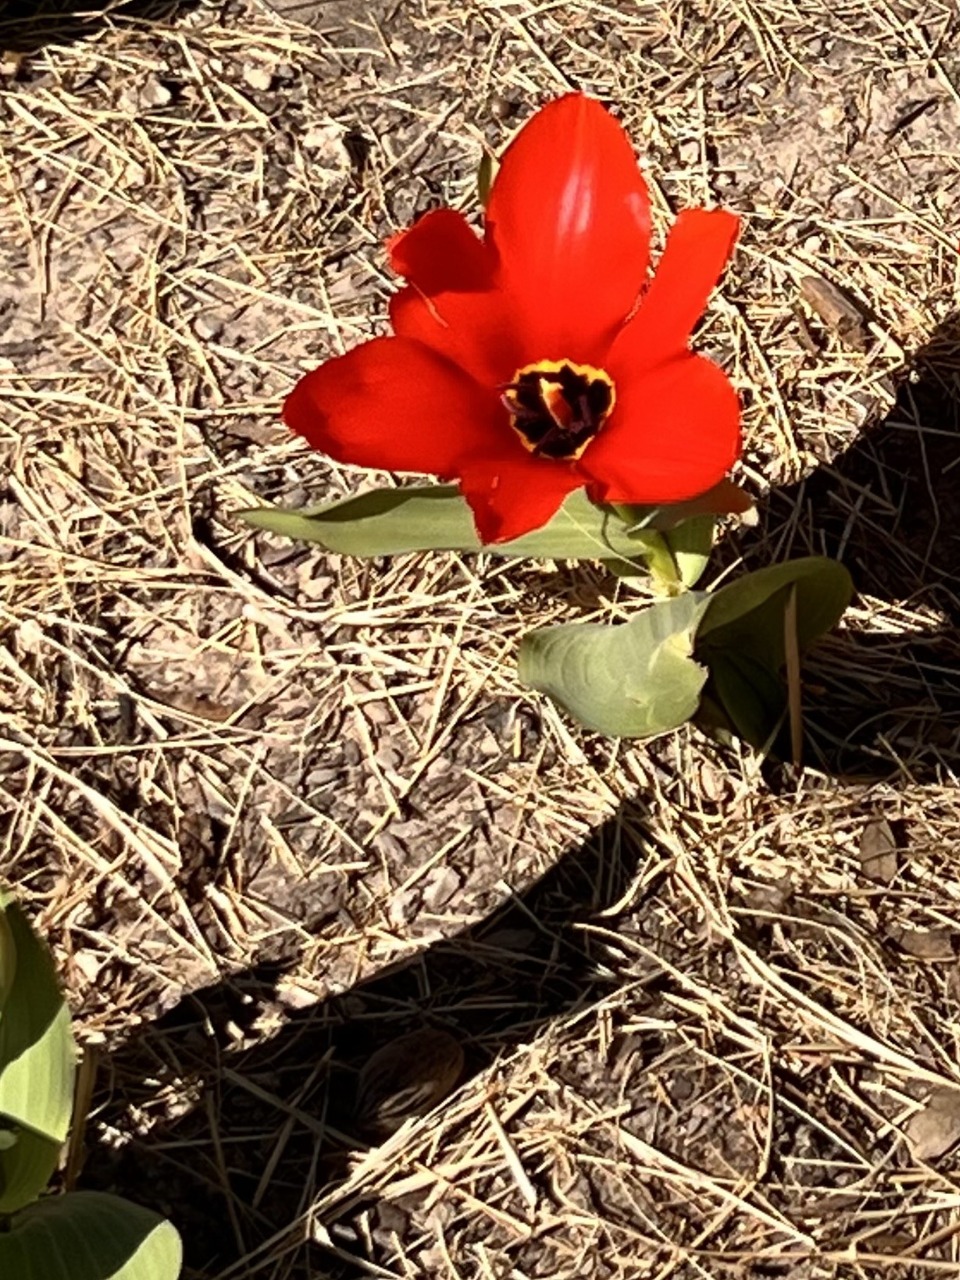 A single red tulip in bloom